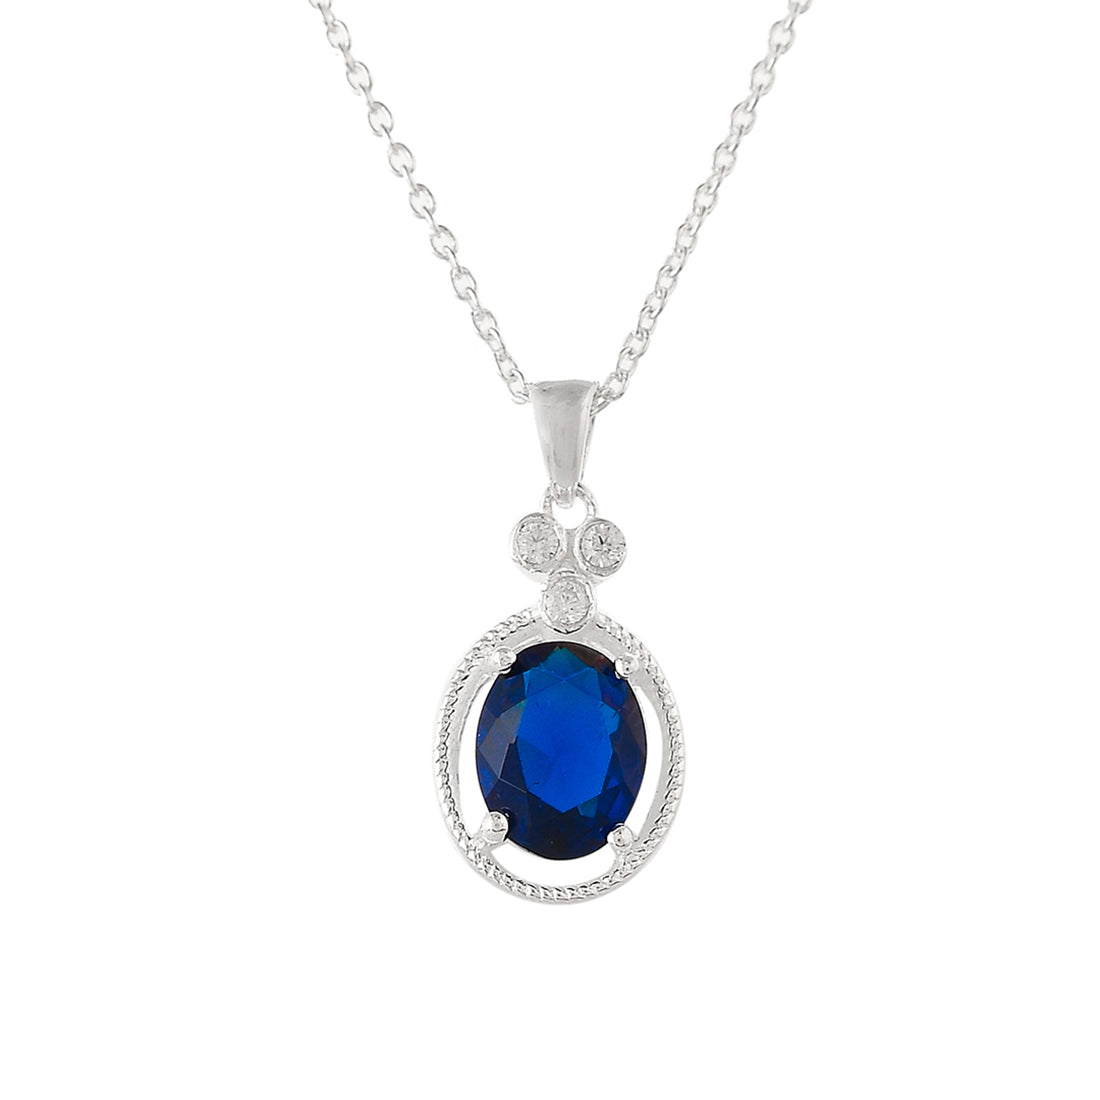 Women's Oval Cut Sapphire Four-Prong Setting Sterling Silver Pendant Set - Voylla